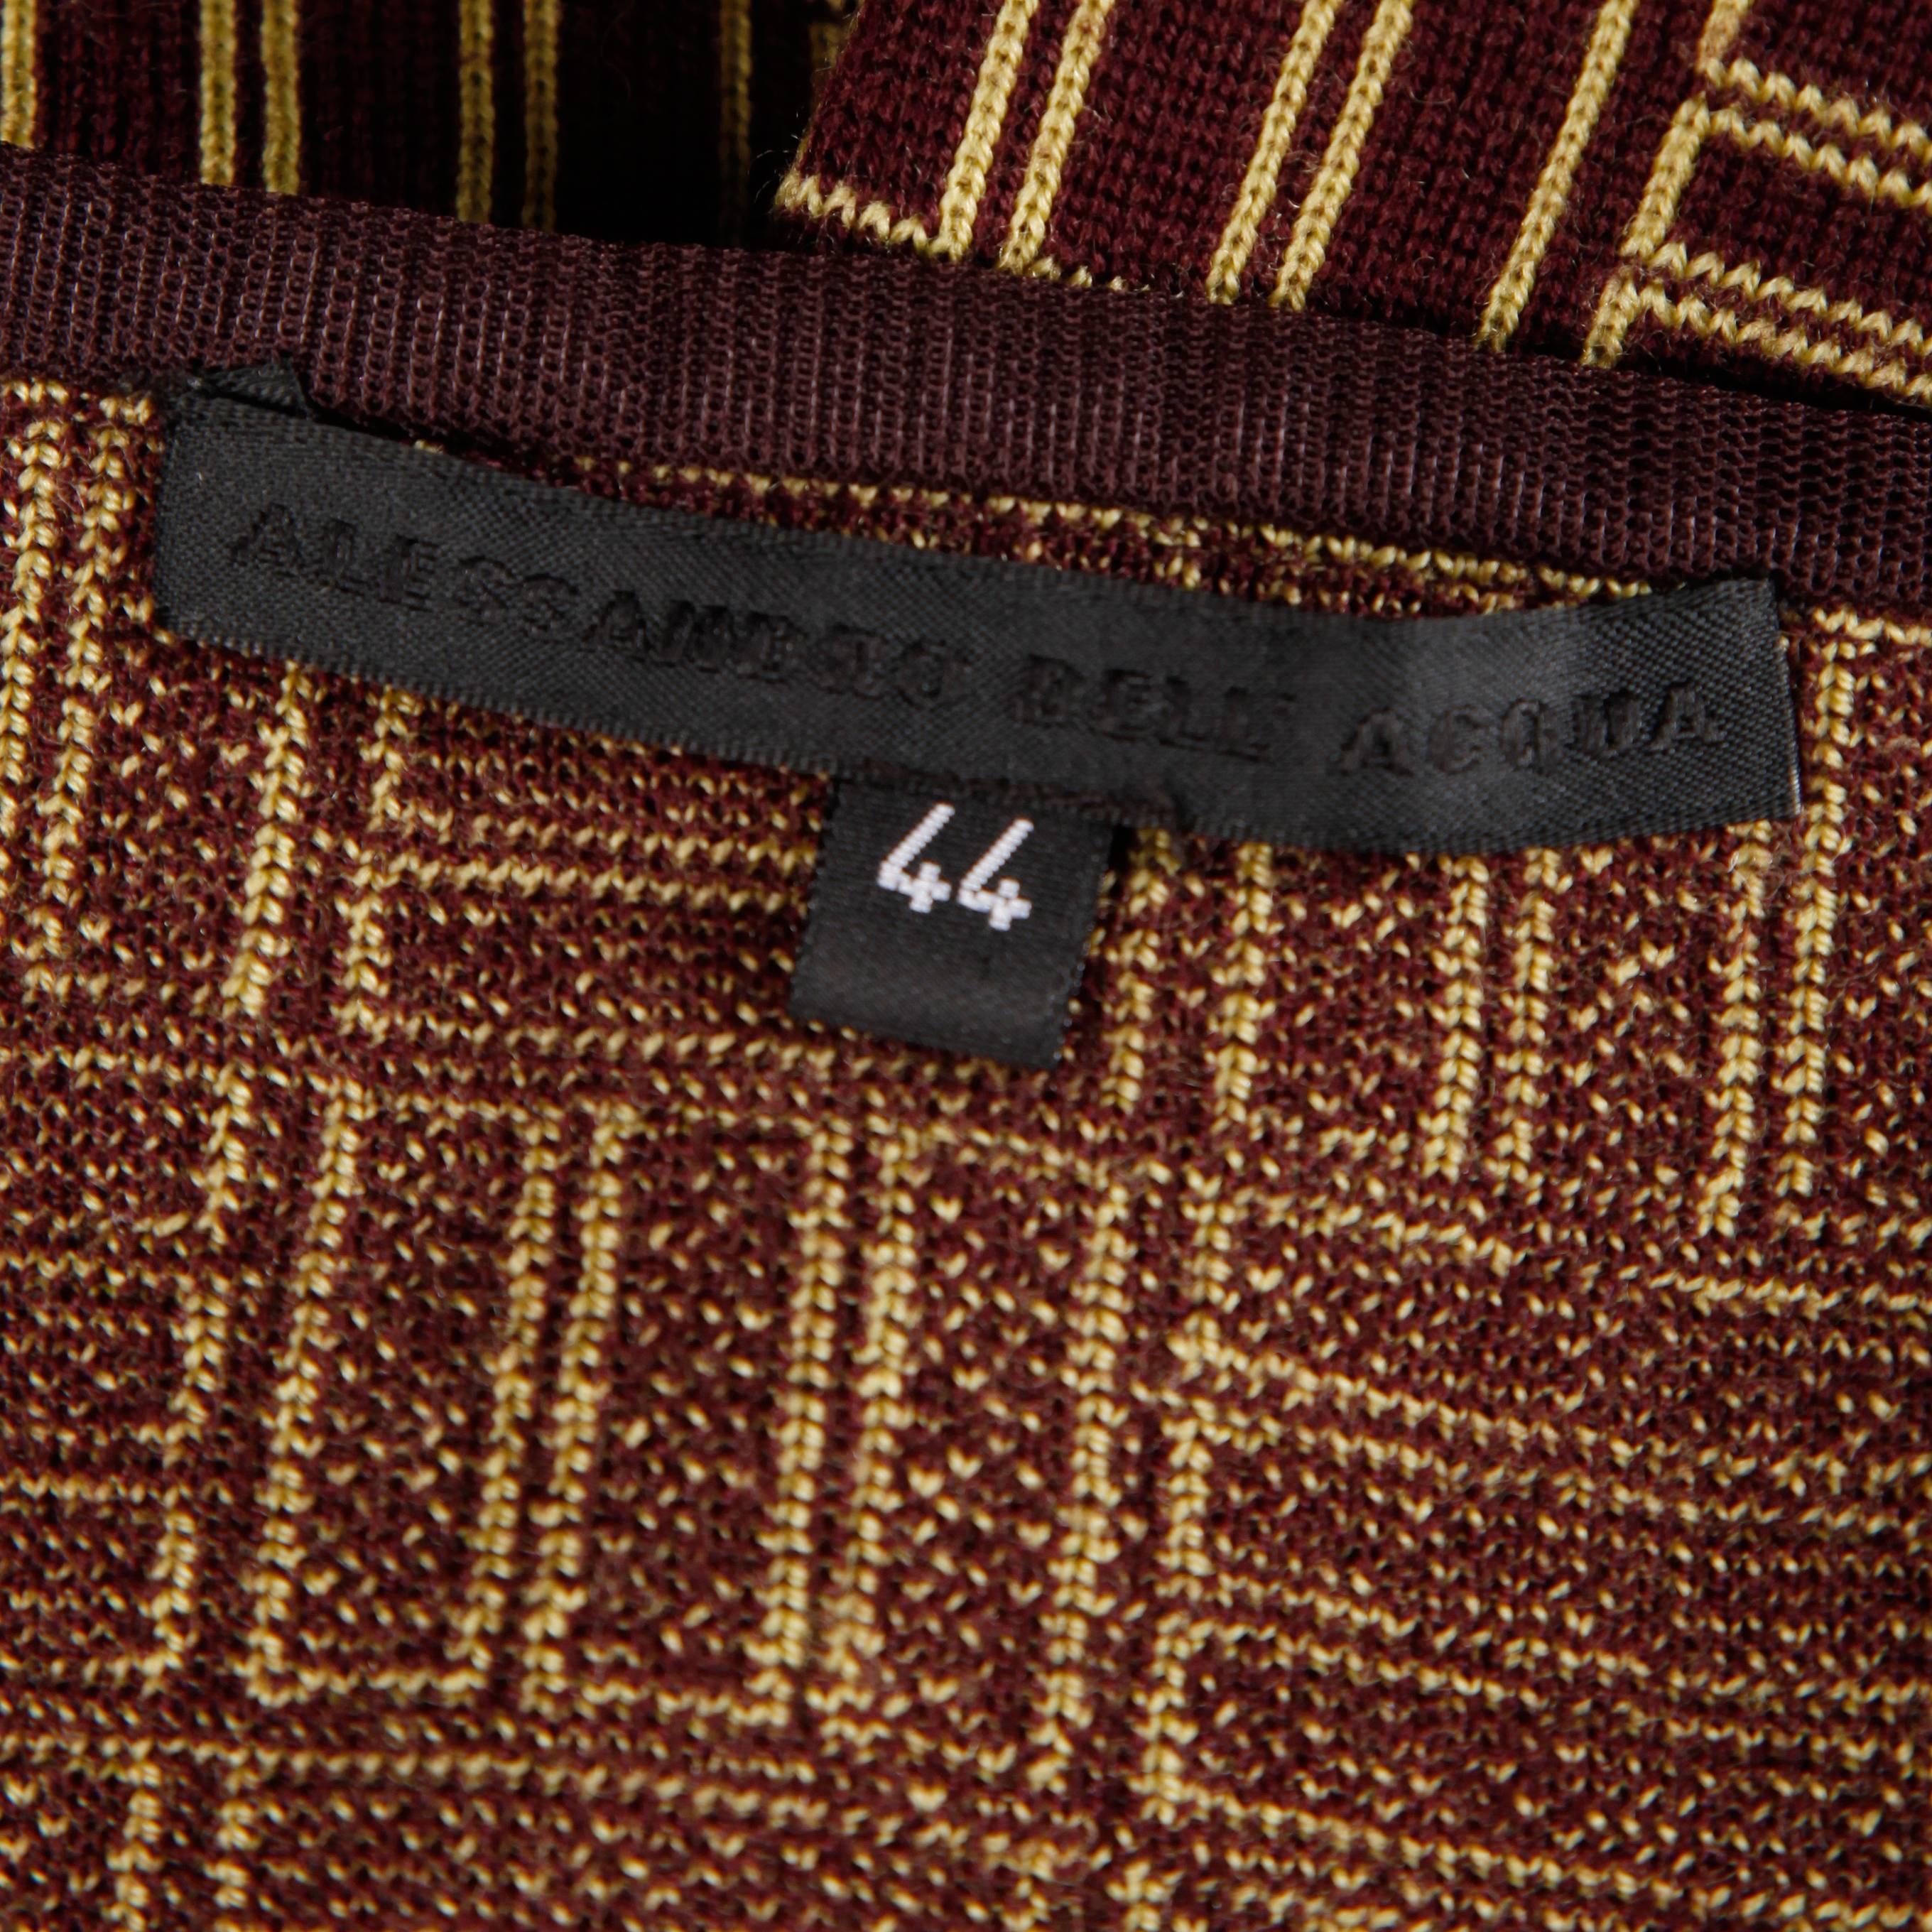 Vintage geometric knit skirt by Alessandro Dell'Acqua in Merino wool.

Details: 

Unlined
Side Zip with Hook Closure
Marked Size: 44
Estimated Size: M-L
Color: Brown/ Tan
Fabric: 100% Merino Wool Knit
Label: Alessandro